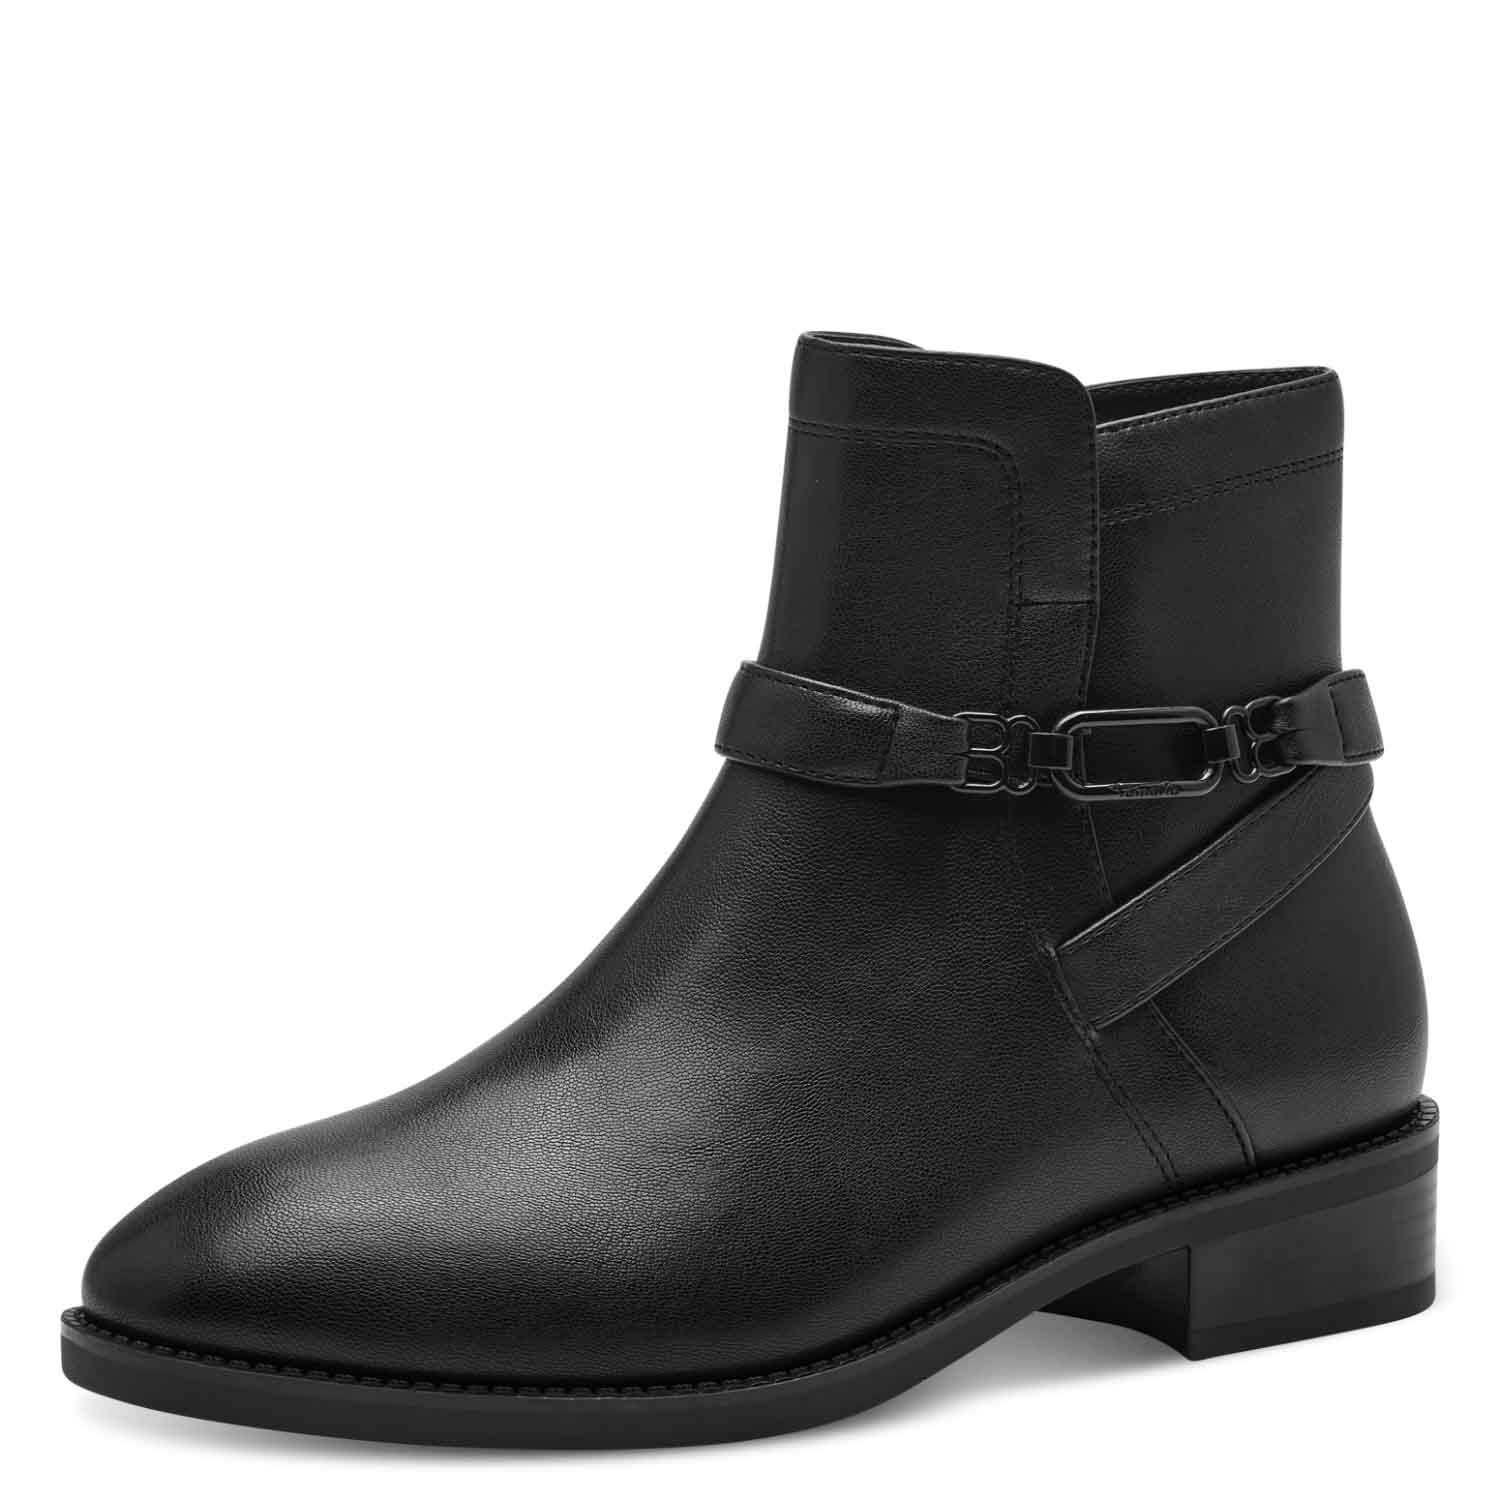 Angular view of the black ankle boot, displaying the wrapped strap detail.